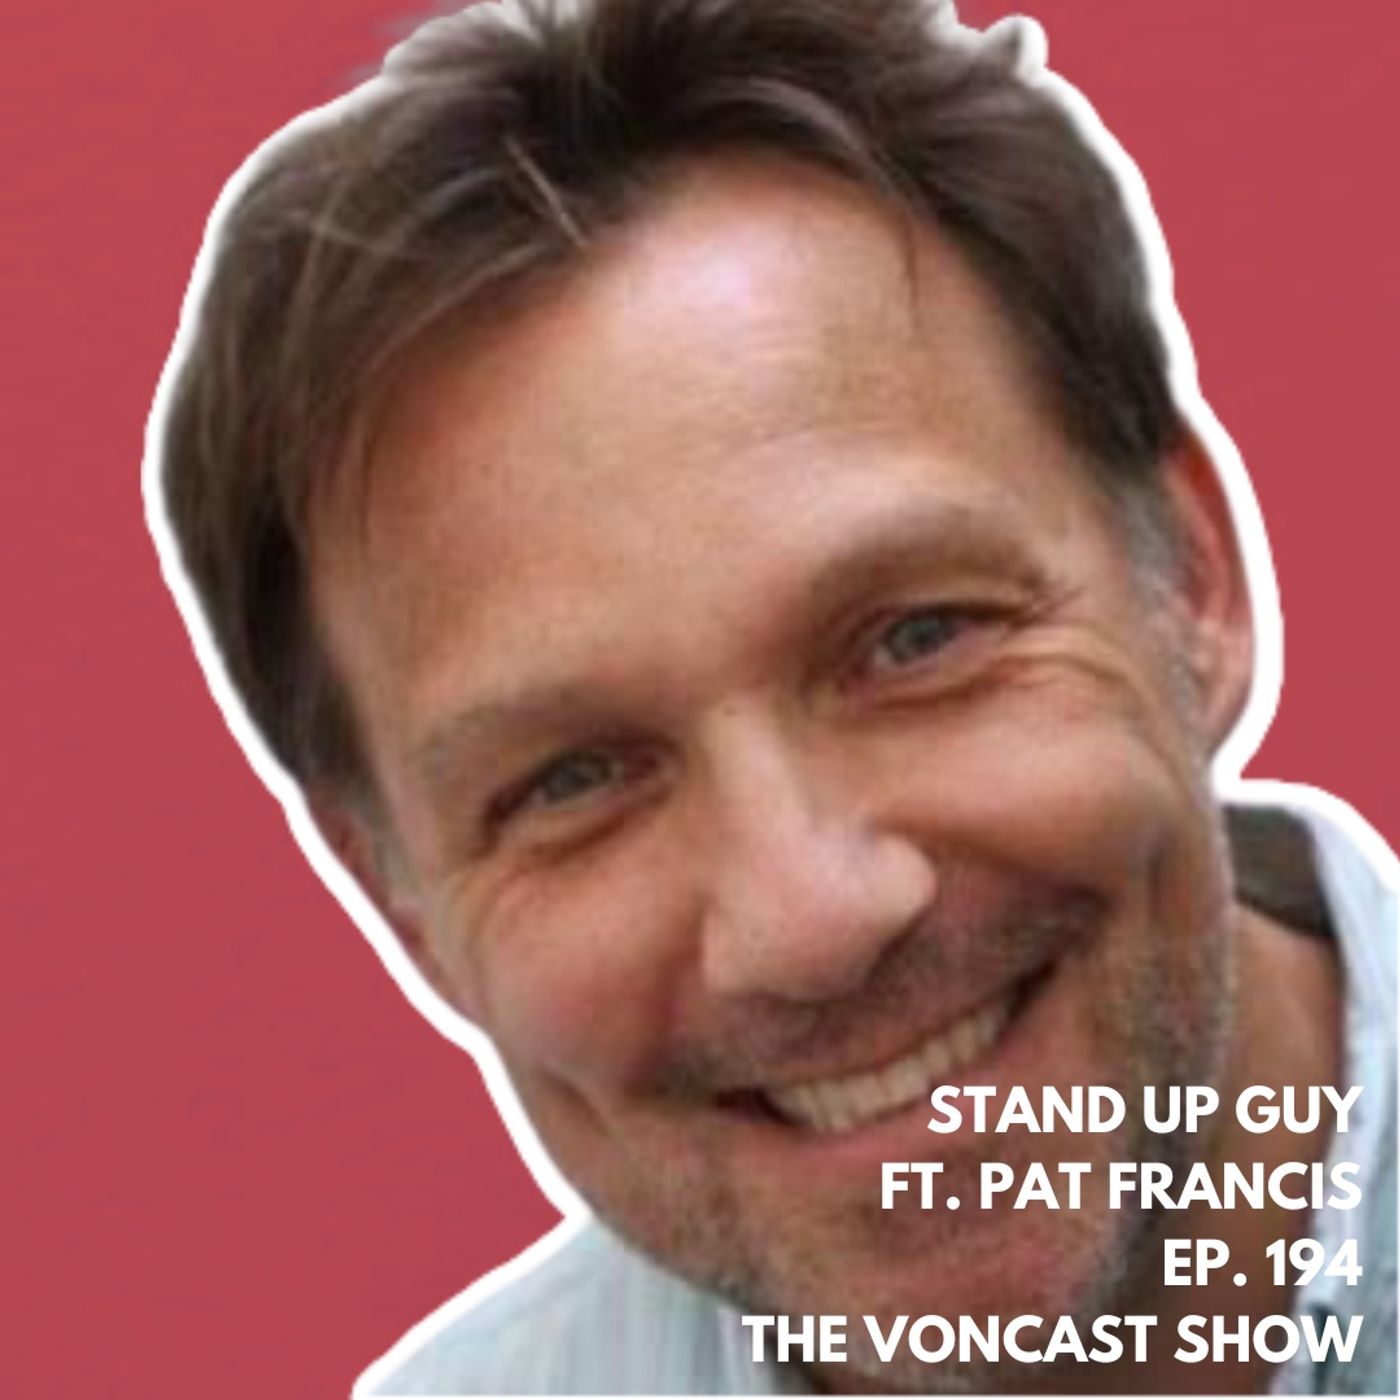 Ep. 194 Stand Up Guy Ft. Pat Francis